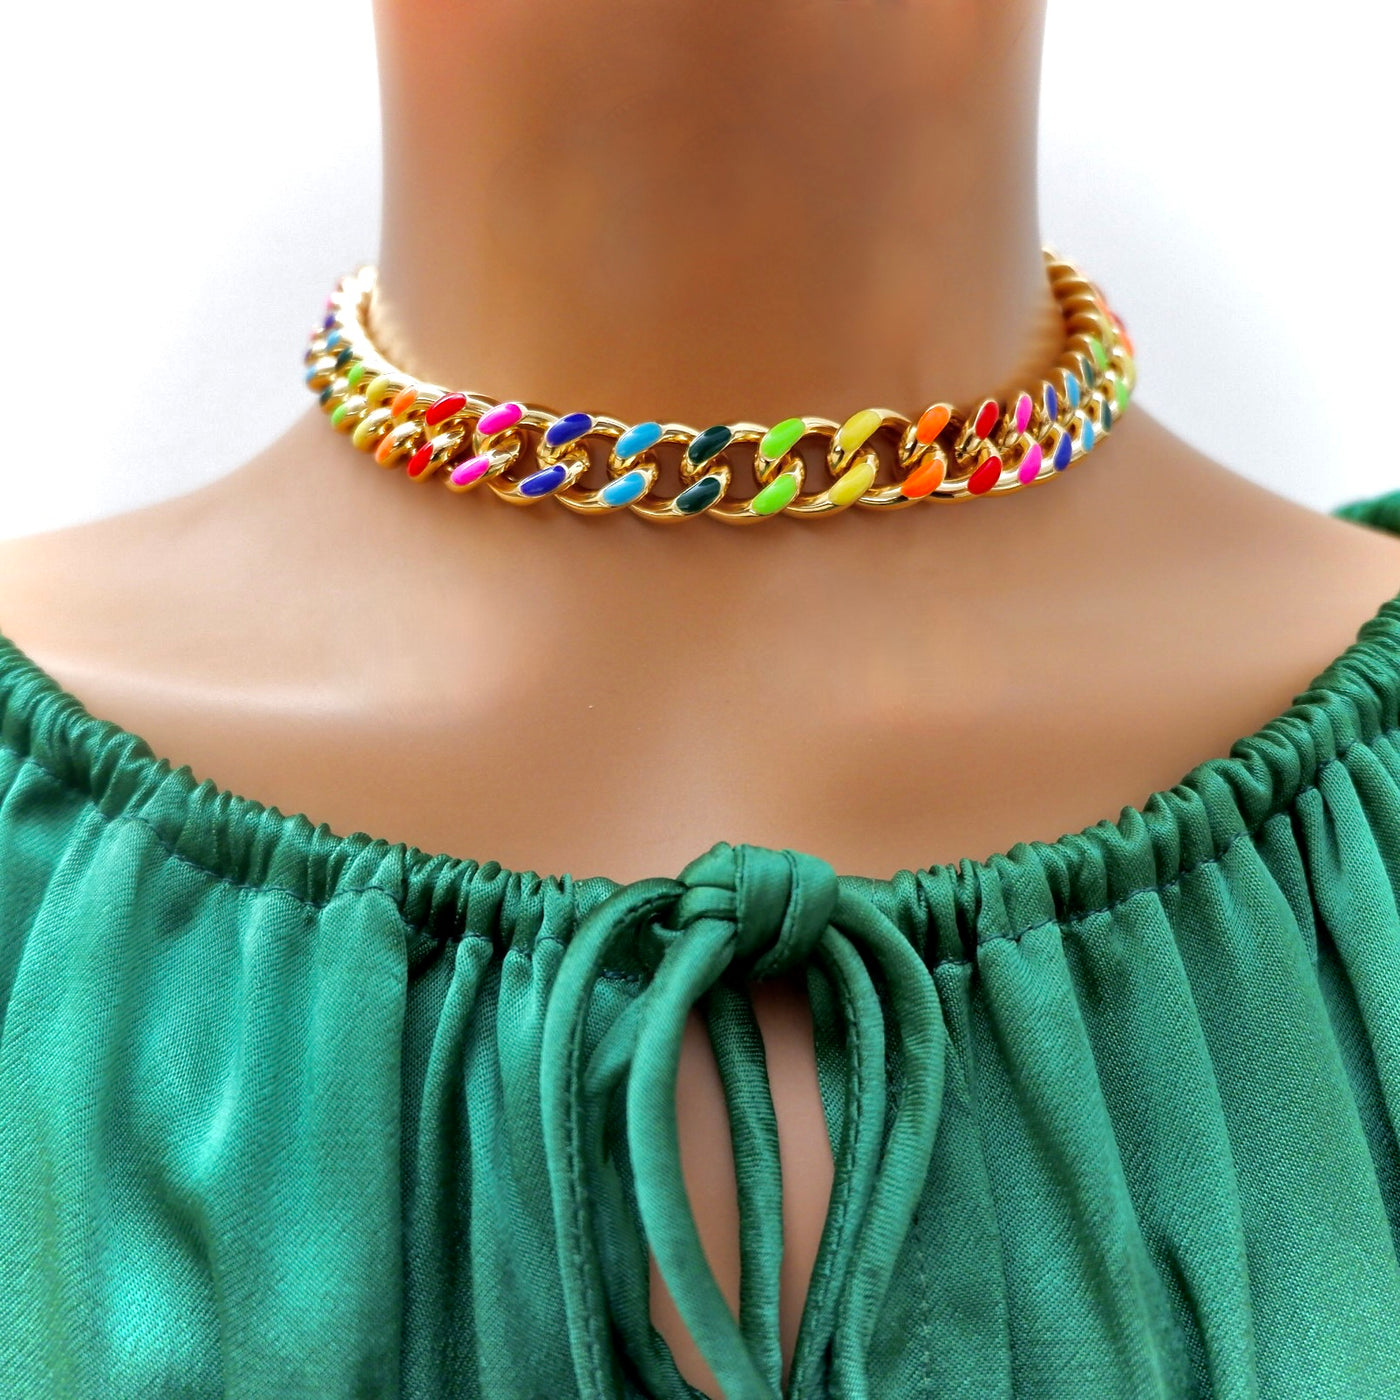 my colorful cuban chain choker necklace